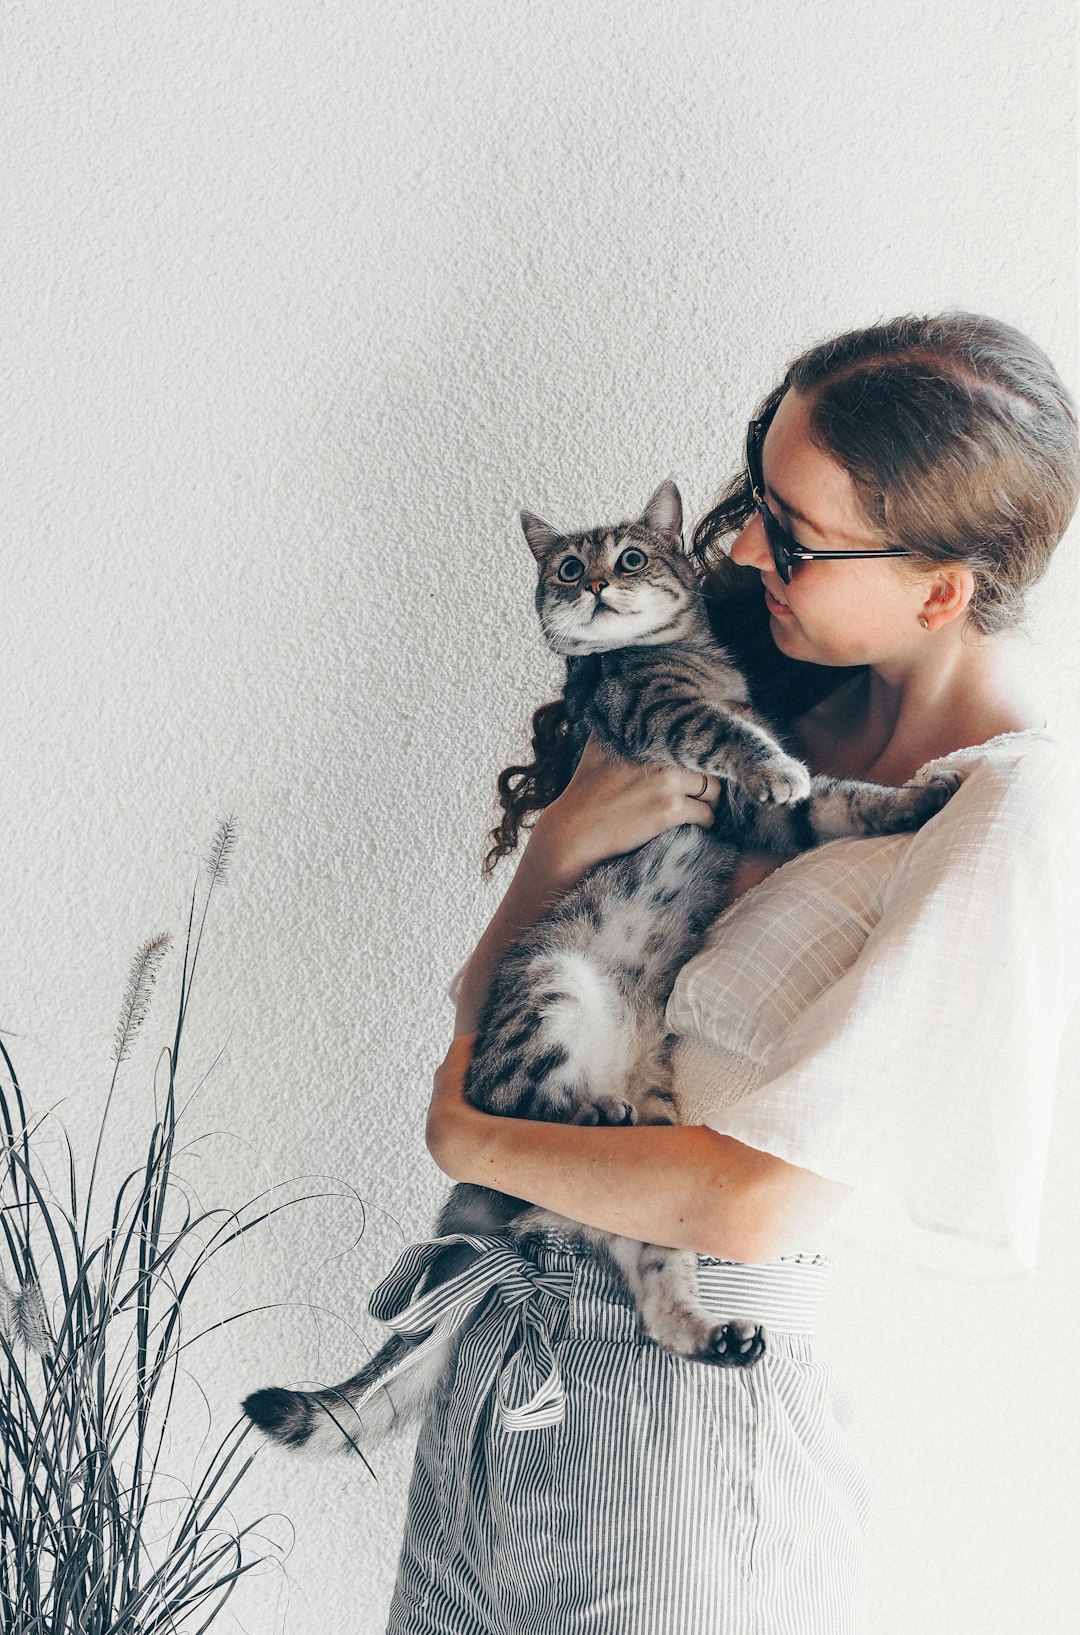 woman in black and white stripe shirt holding silver tabby cat